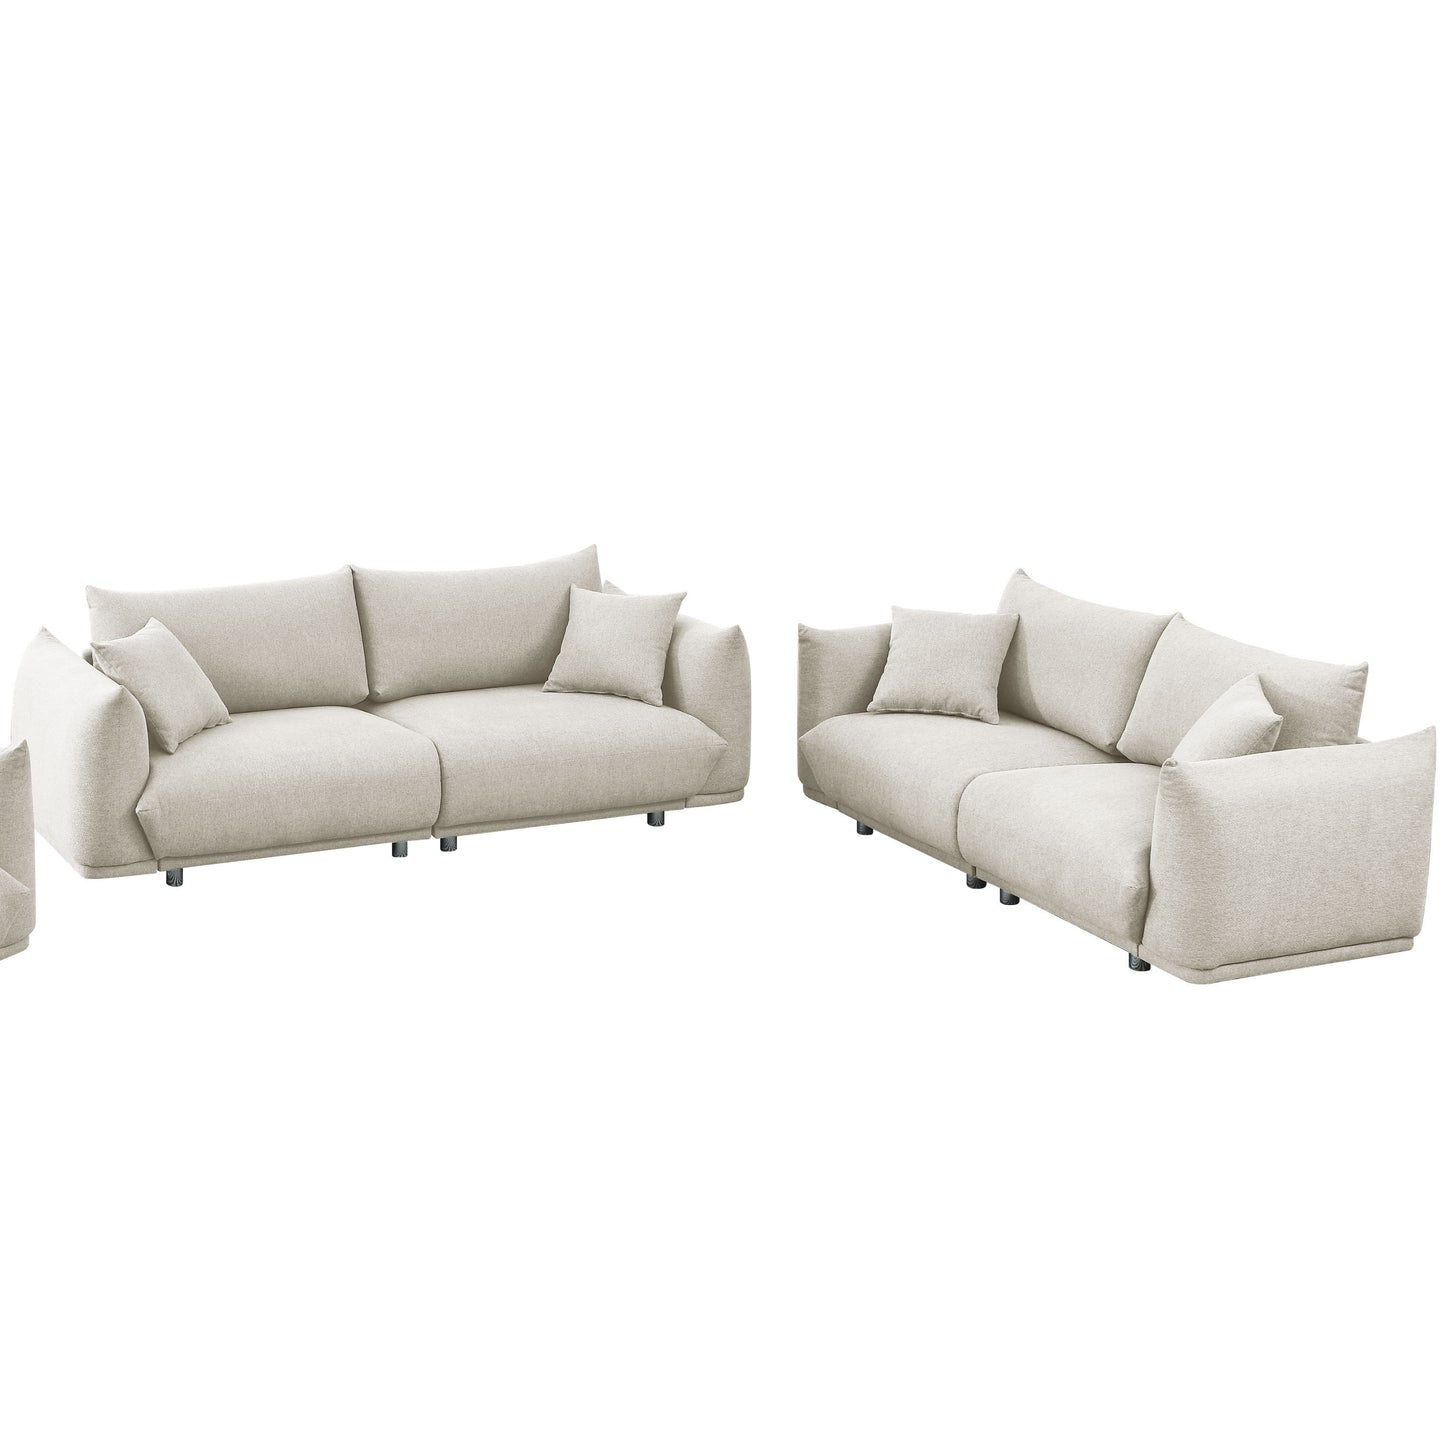 3-seater + 2-seater combination sofa Modern Couch for Living Room Sofa,Solid Wood Frame and Stable Metal Legs, 4 Pillows, Sofa Furniture for Apartment